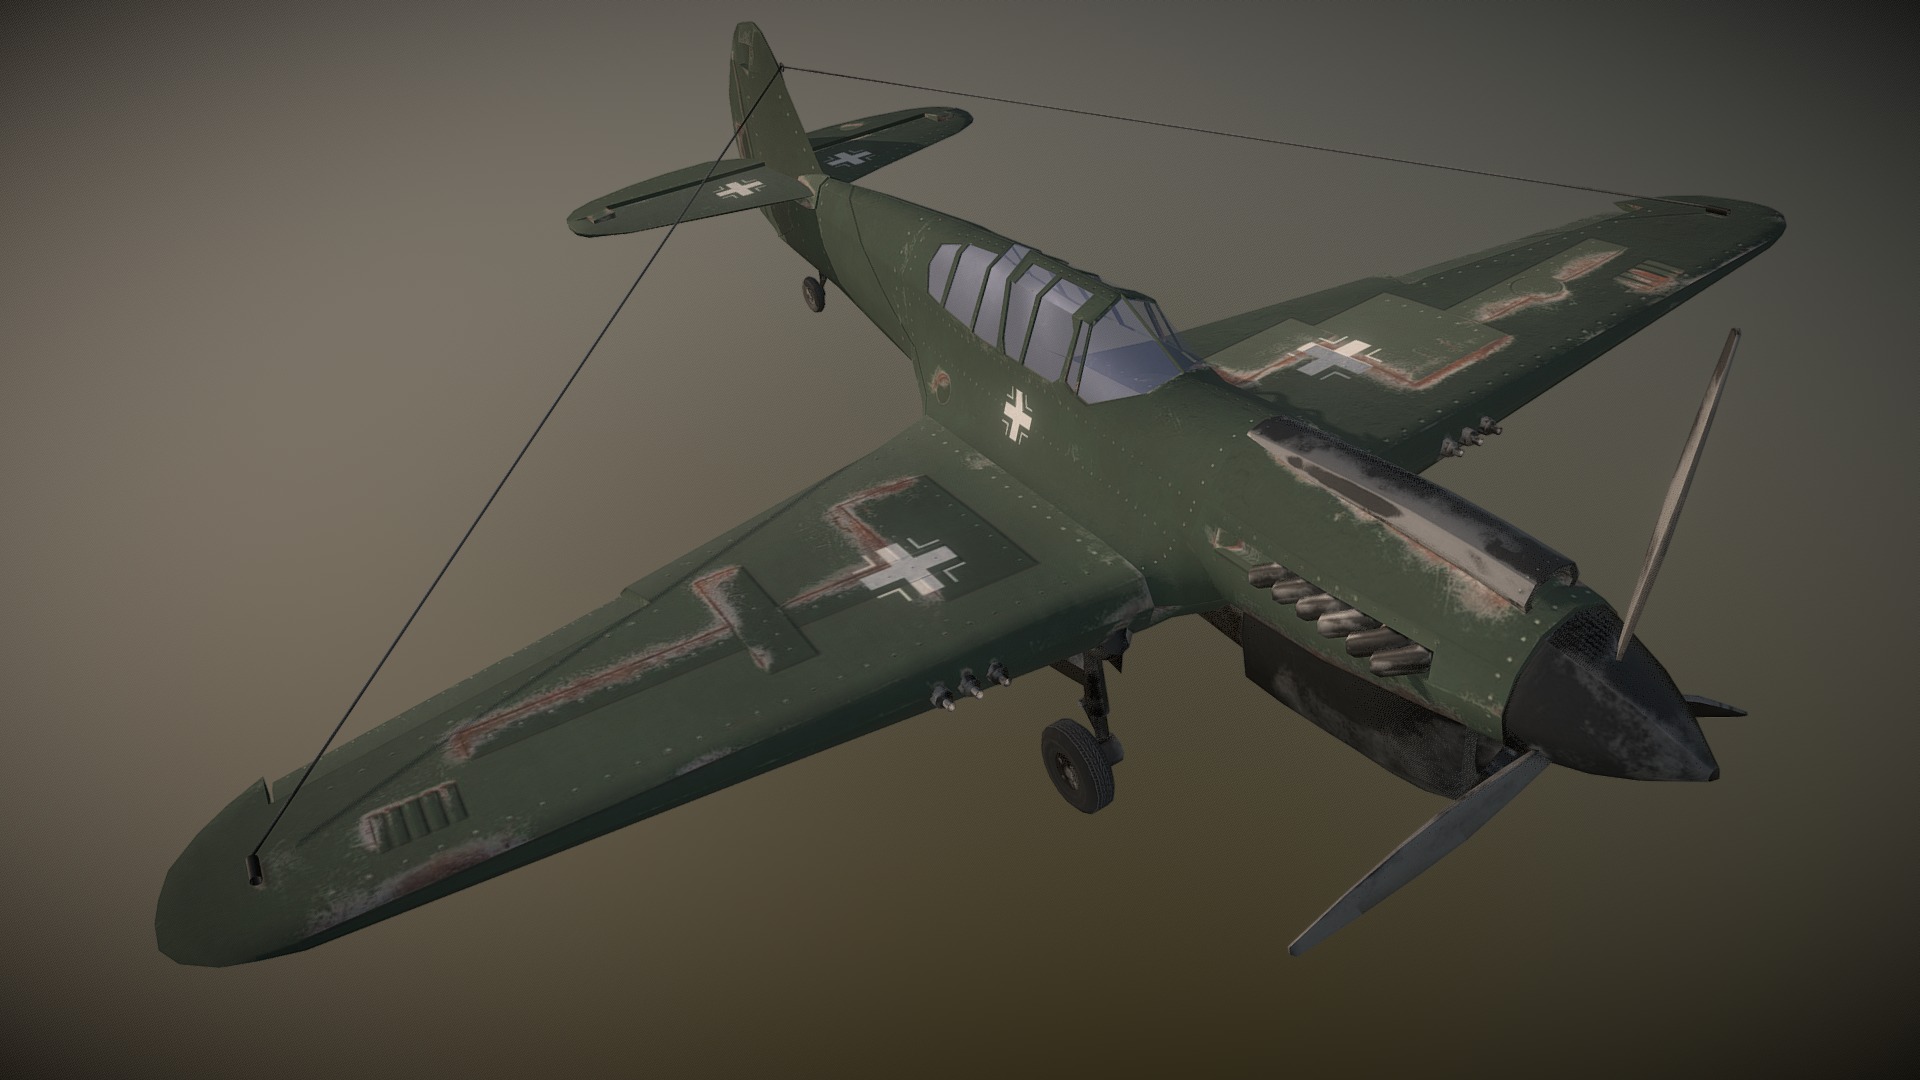 3D model Plane green - This is a 3D model of the Plane green. The 3D model is about a green military plane.